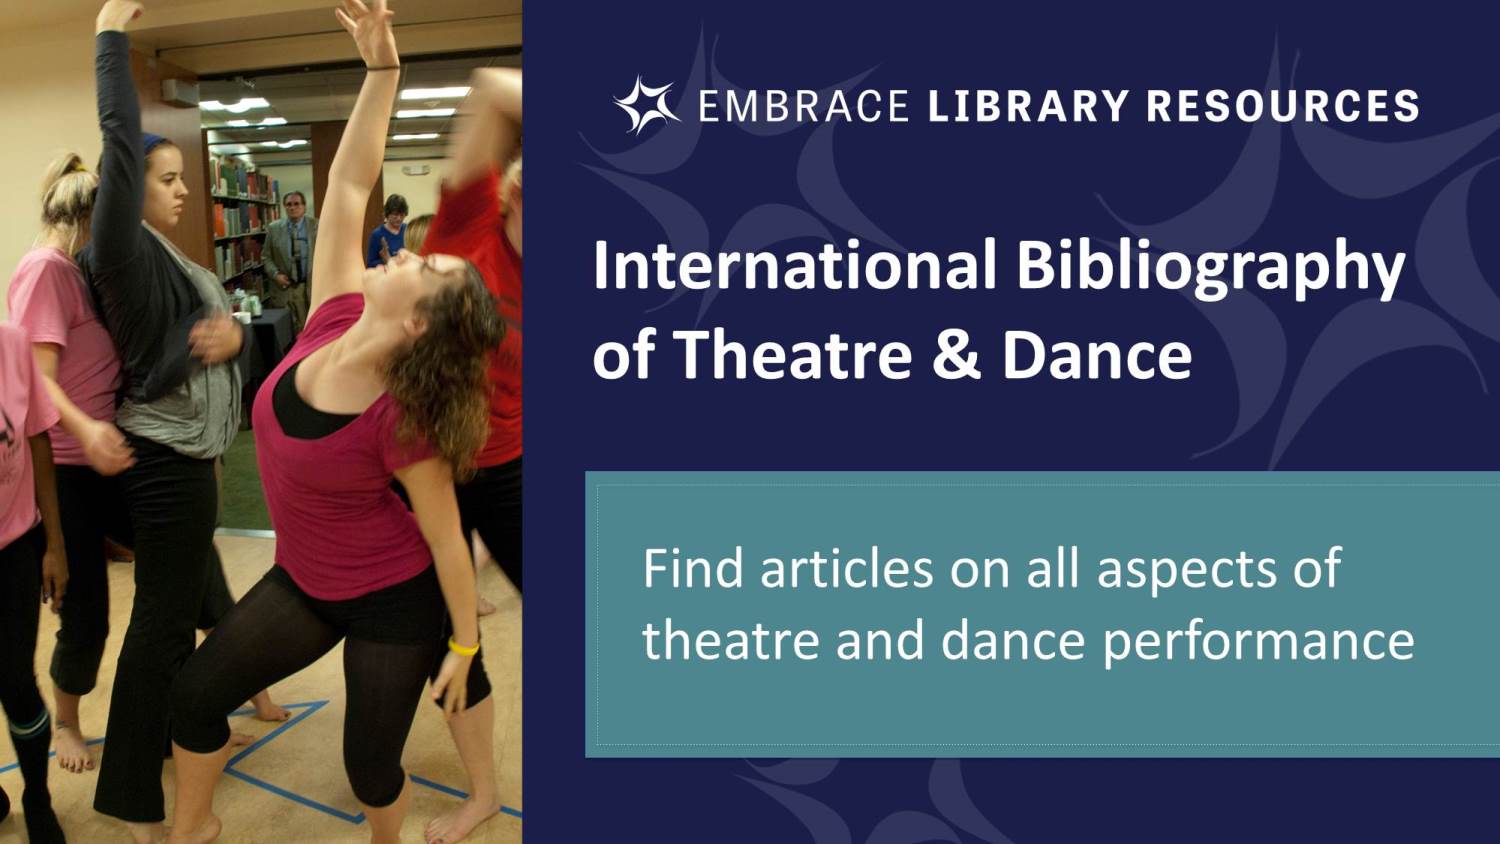 Search for journal articles about theatre and dance